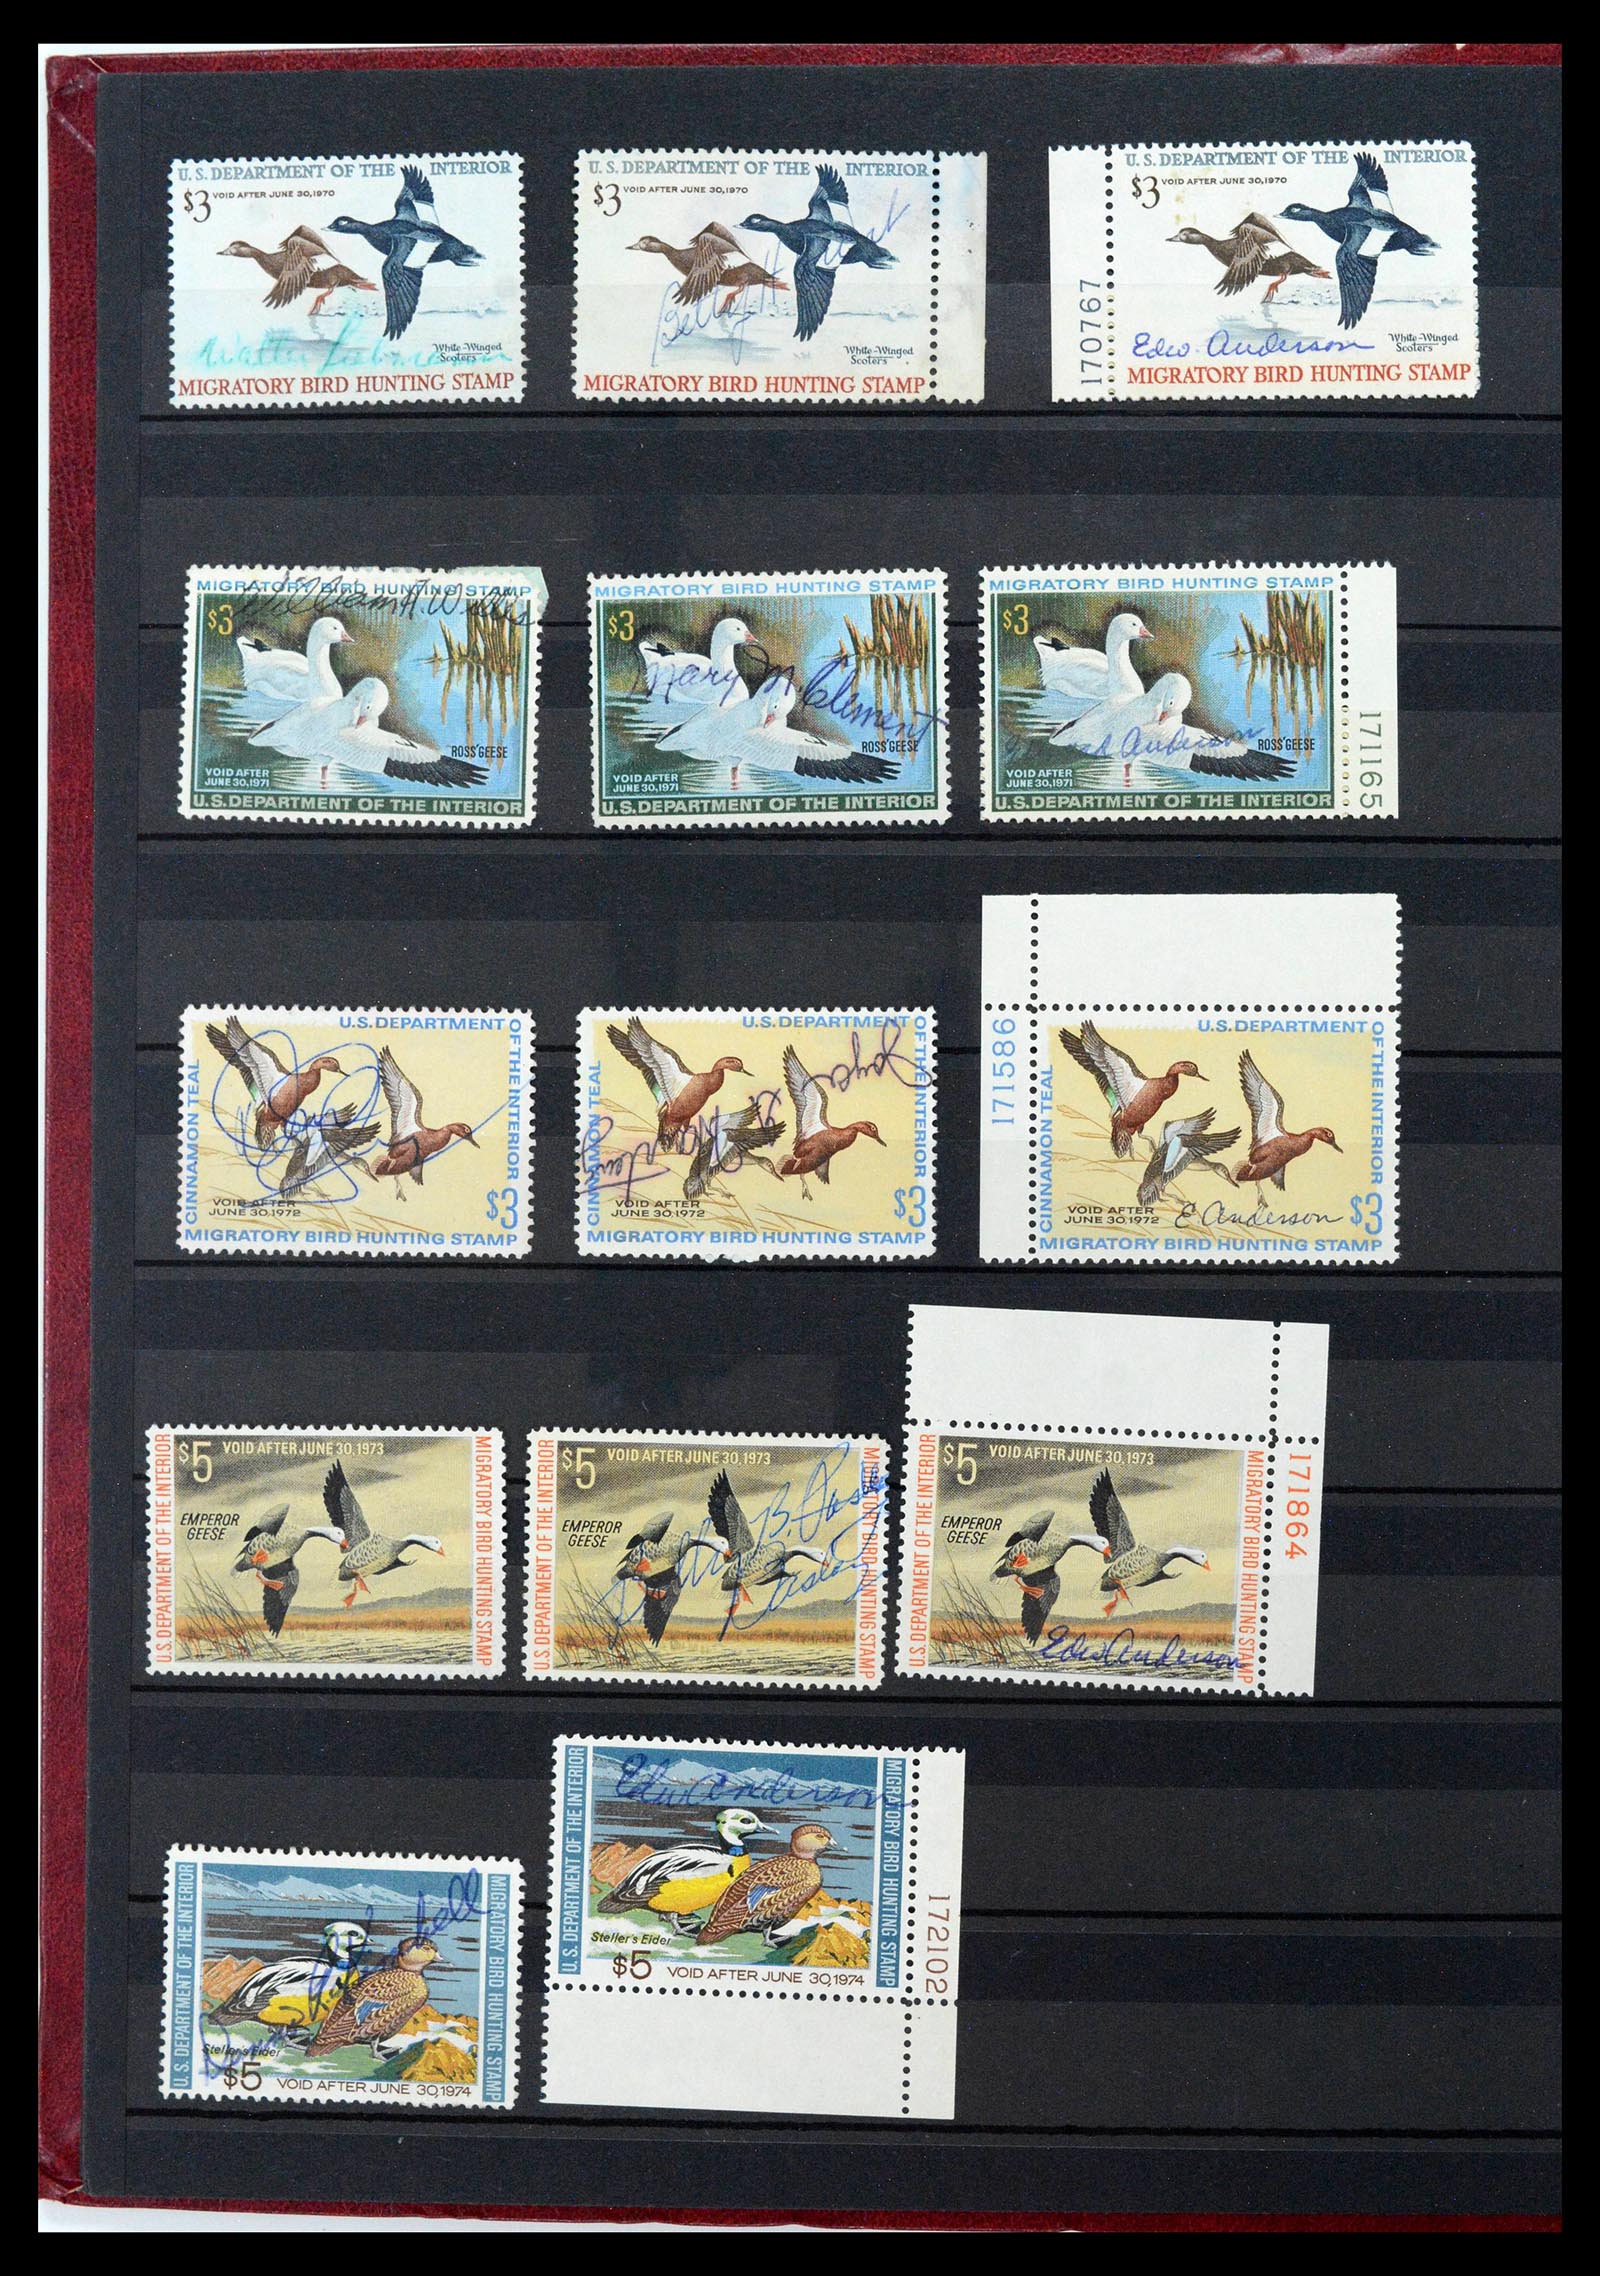 39426 0008 - Stamp collection 39426 USA duckstamps 1934-2007.